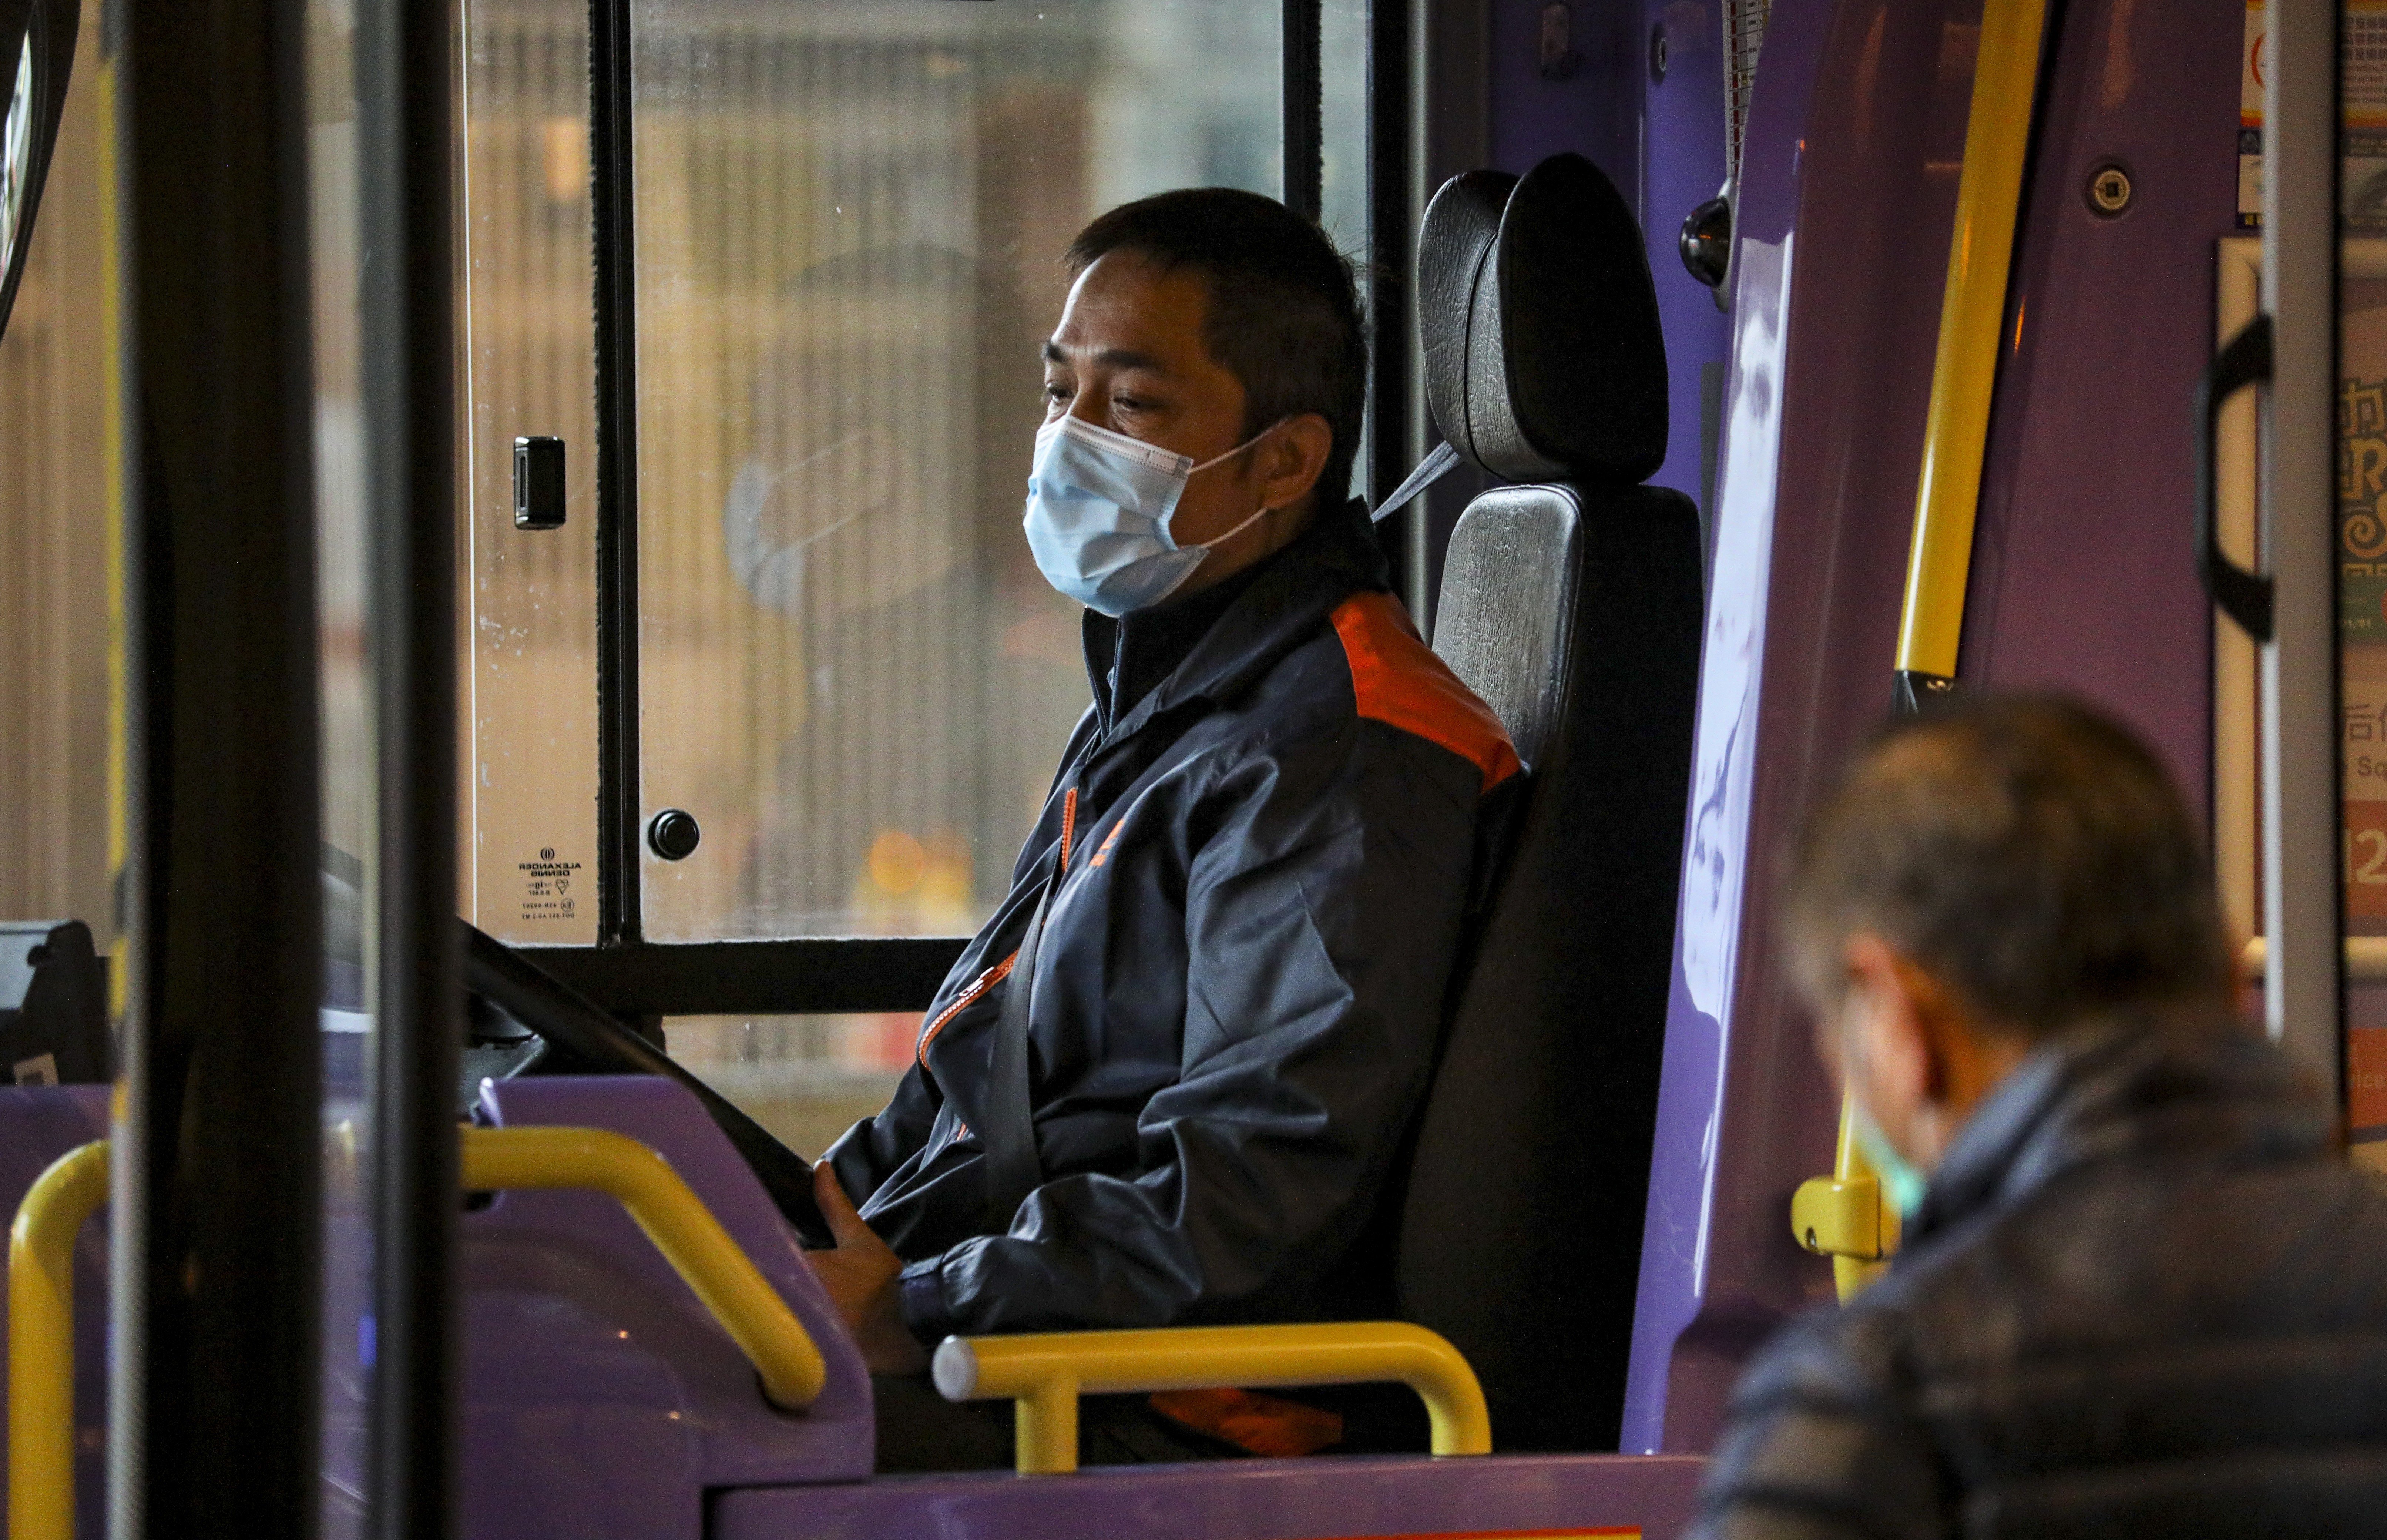 A bus driver seen wearing a surgical mask in Admiralty. Photo: Dickson Lee